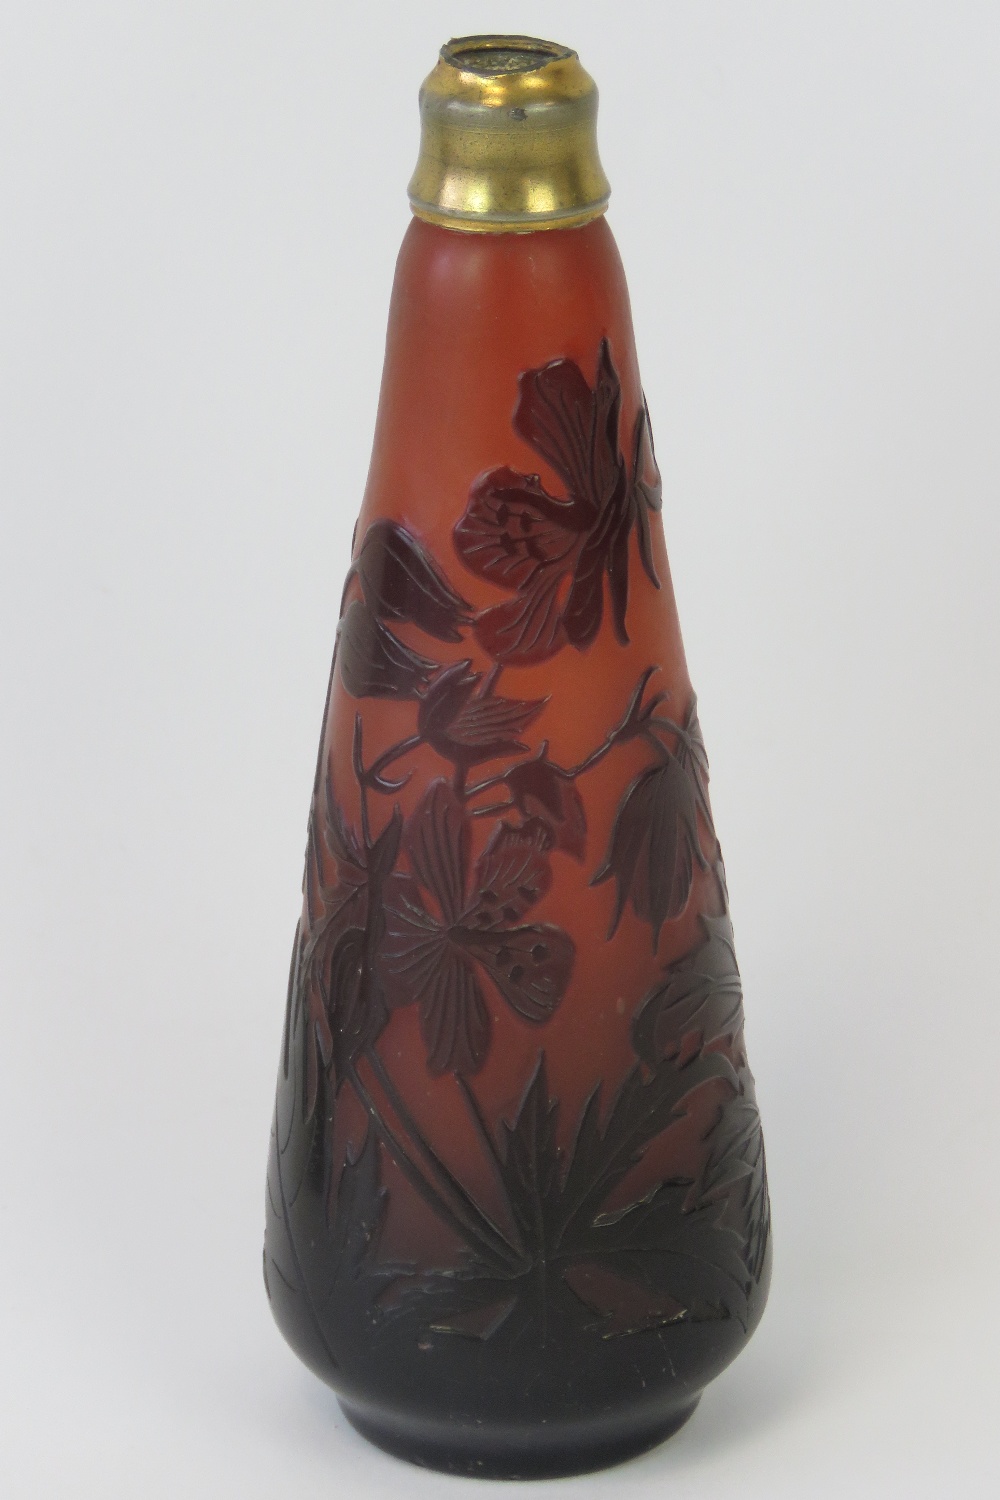 An Emile Gallé (1846-1904 ) Cameo Glass perfume bottle with magenta and cherry red floral pattern